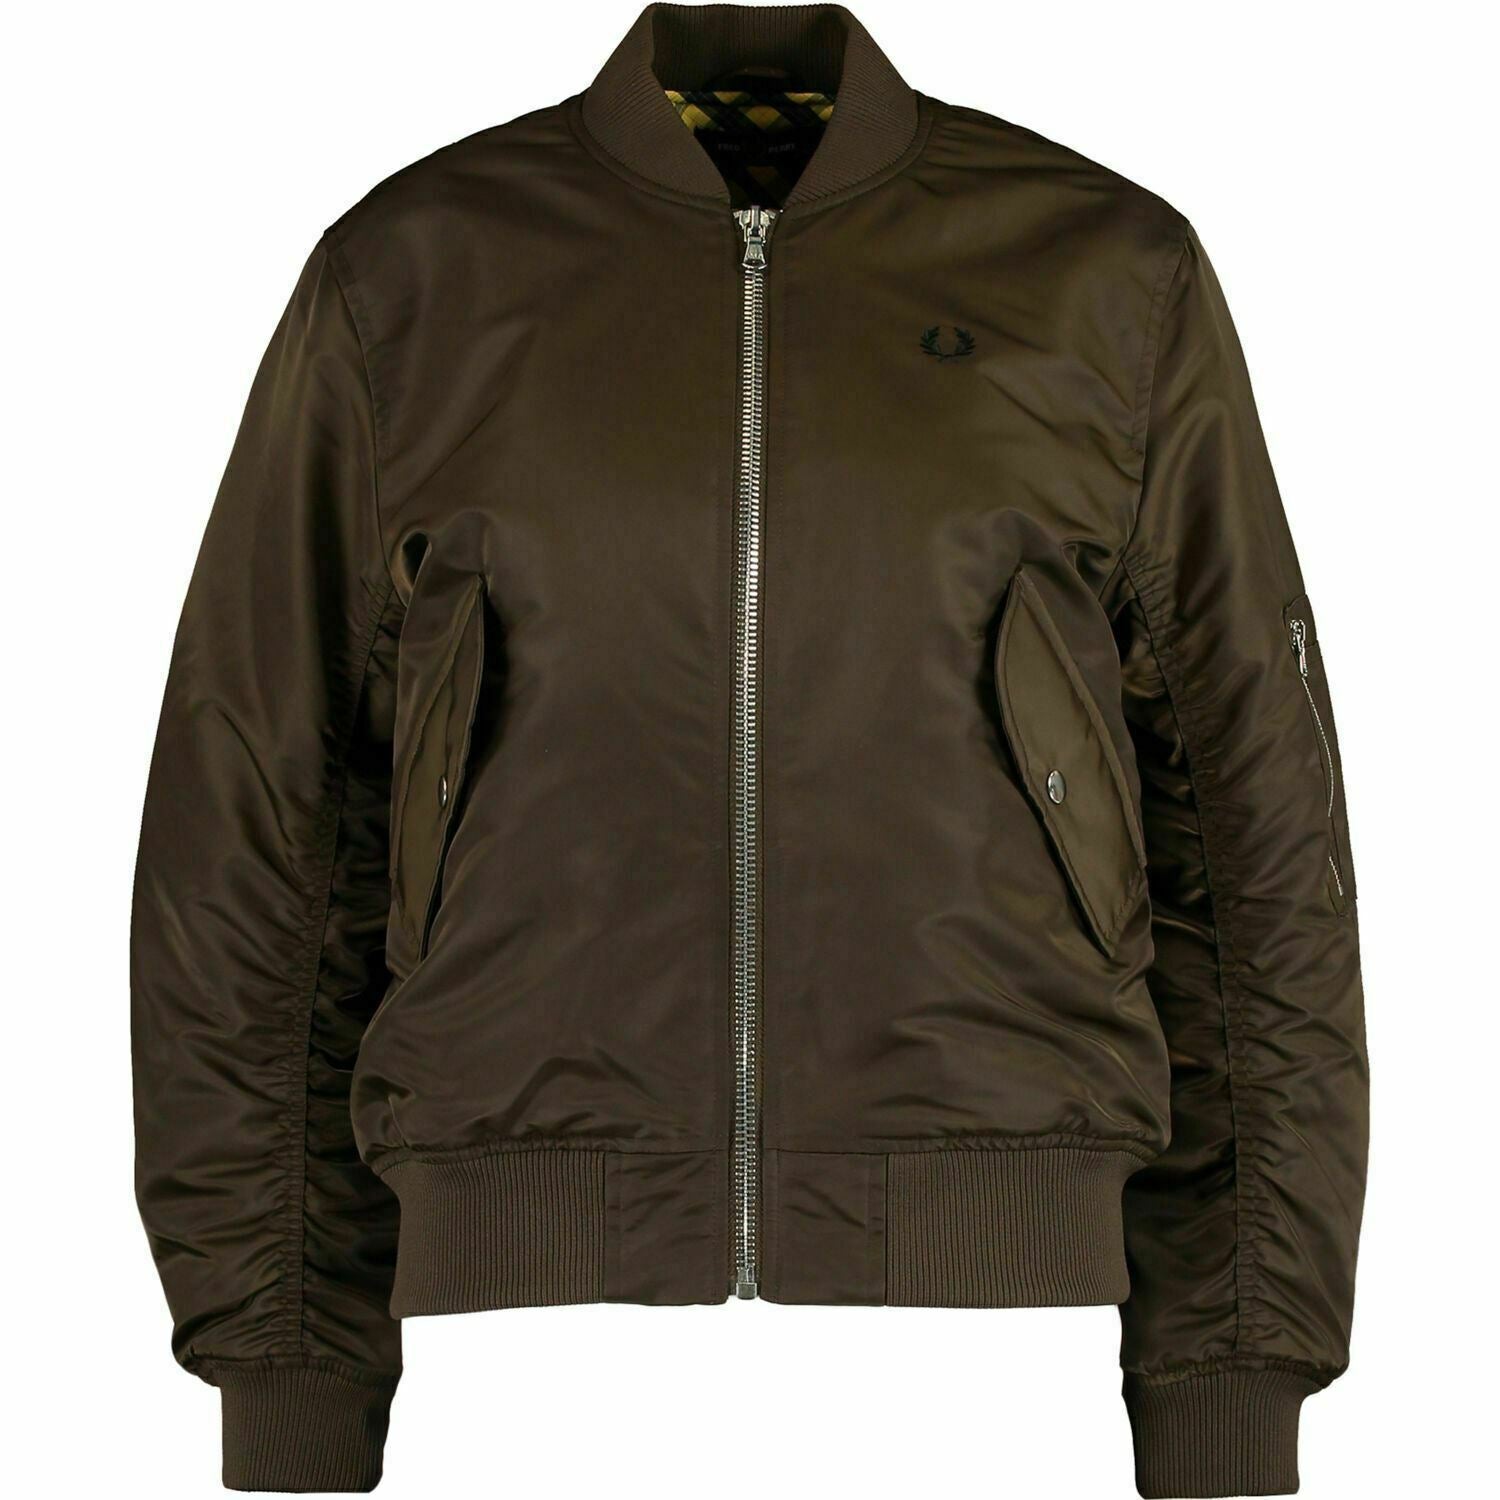 FRED PERRY Women's Bomber Jacket, Dark Olive Green, size UK 12